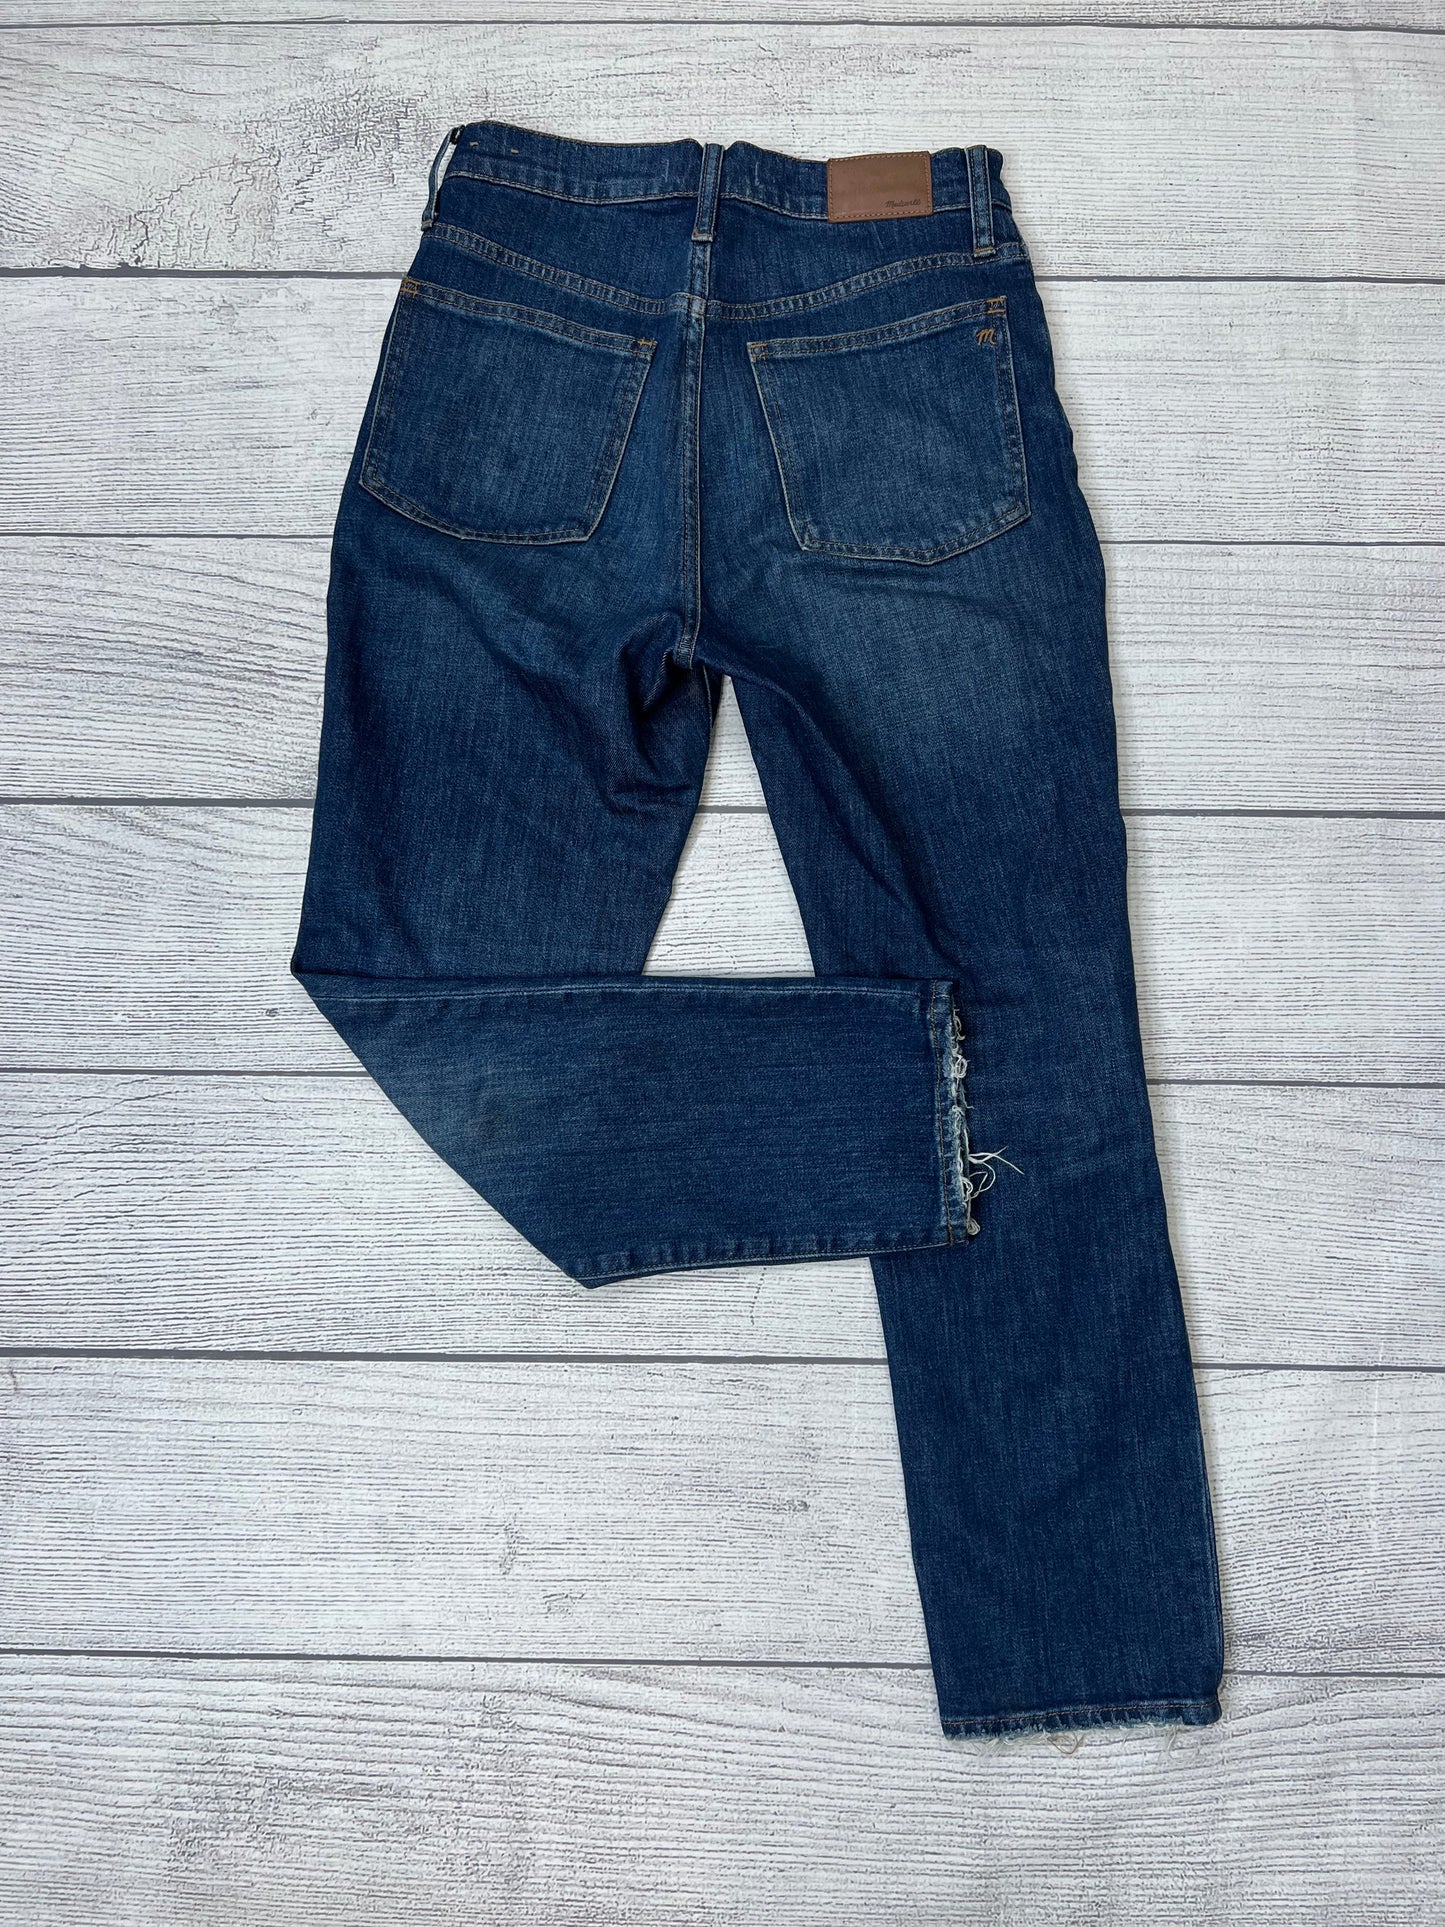 Jeans Designer By Madewell  Size: 2